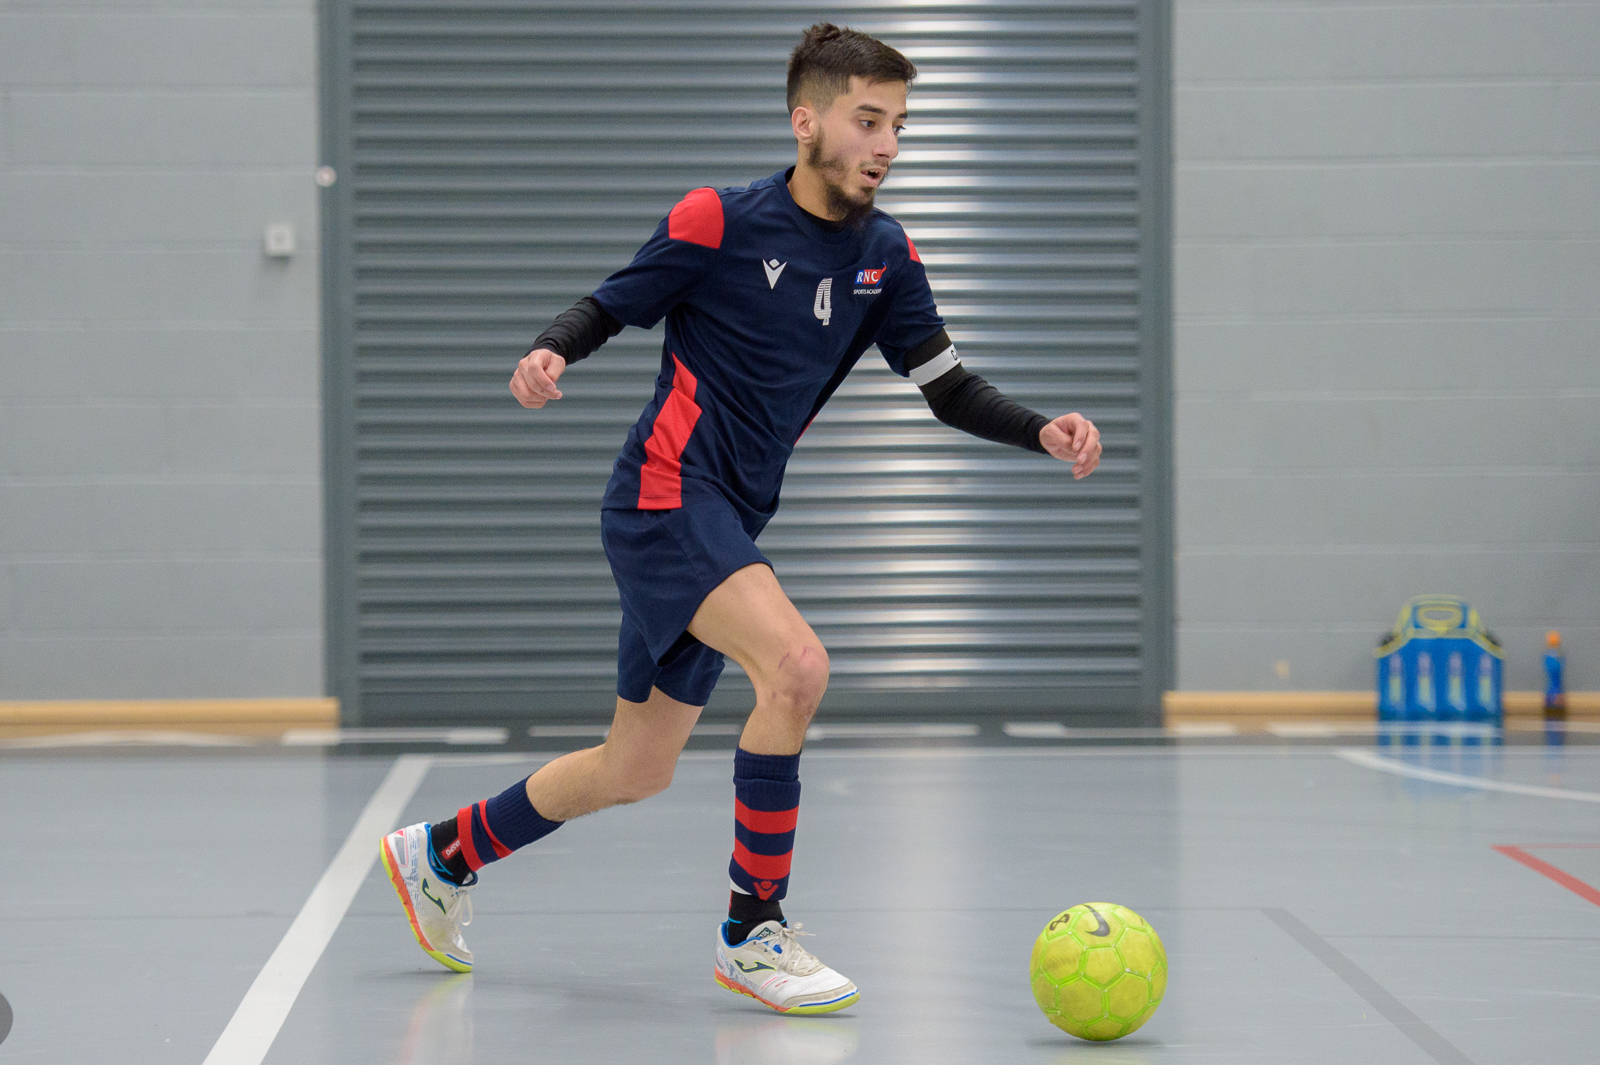 a player dribbling with the ball during a partially sighted futsal match